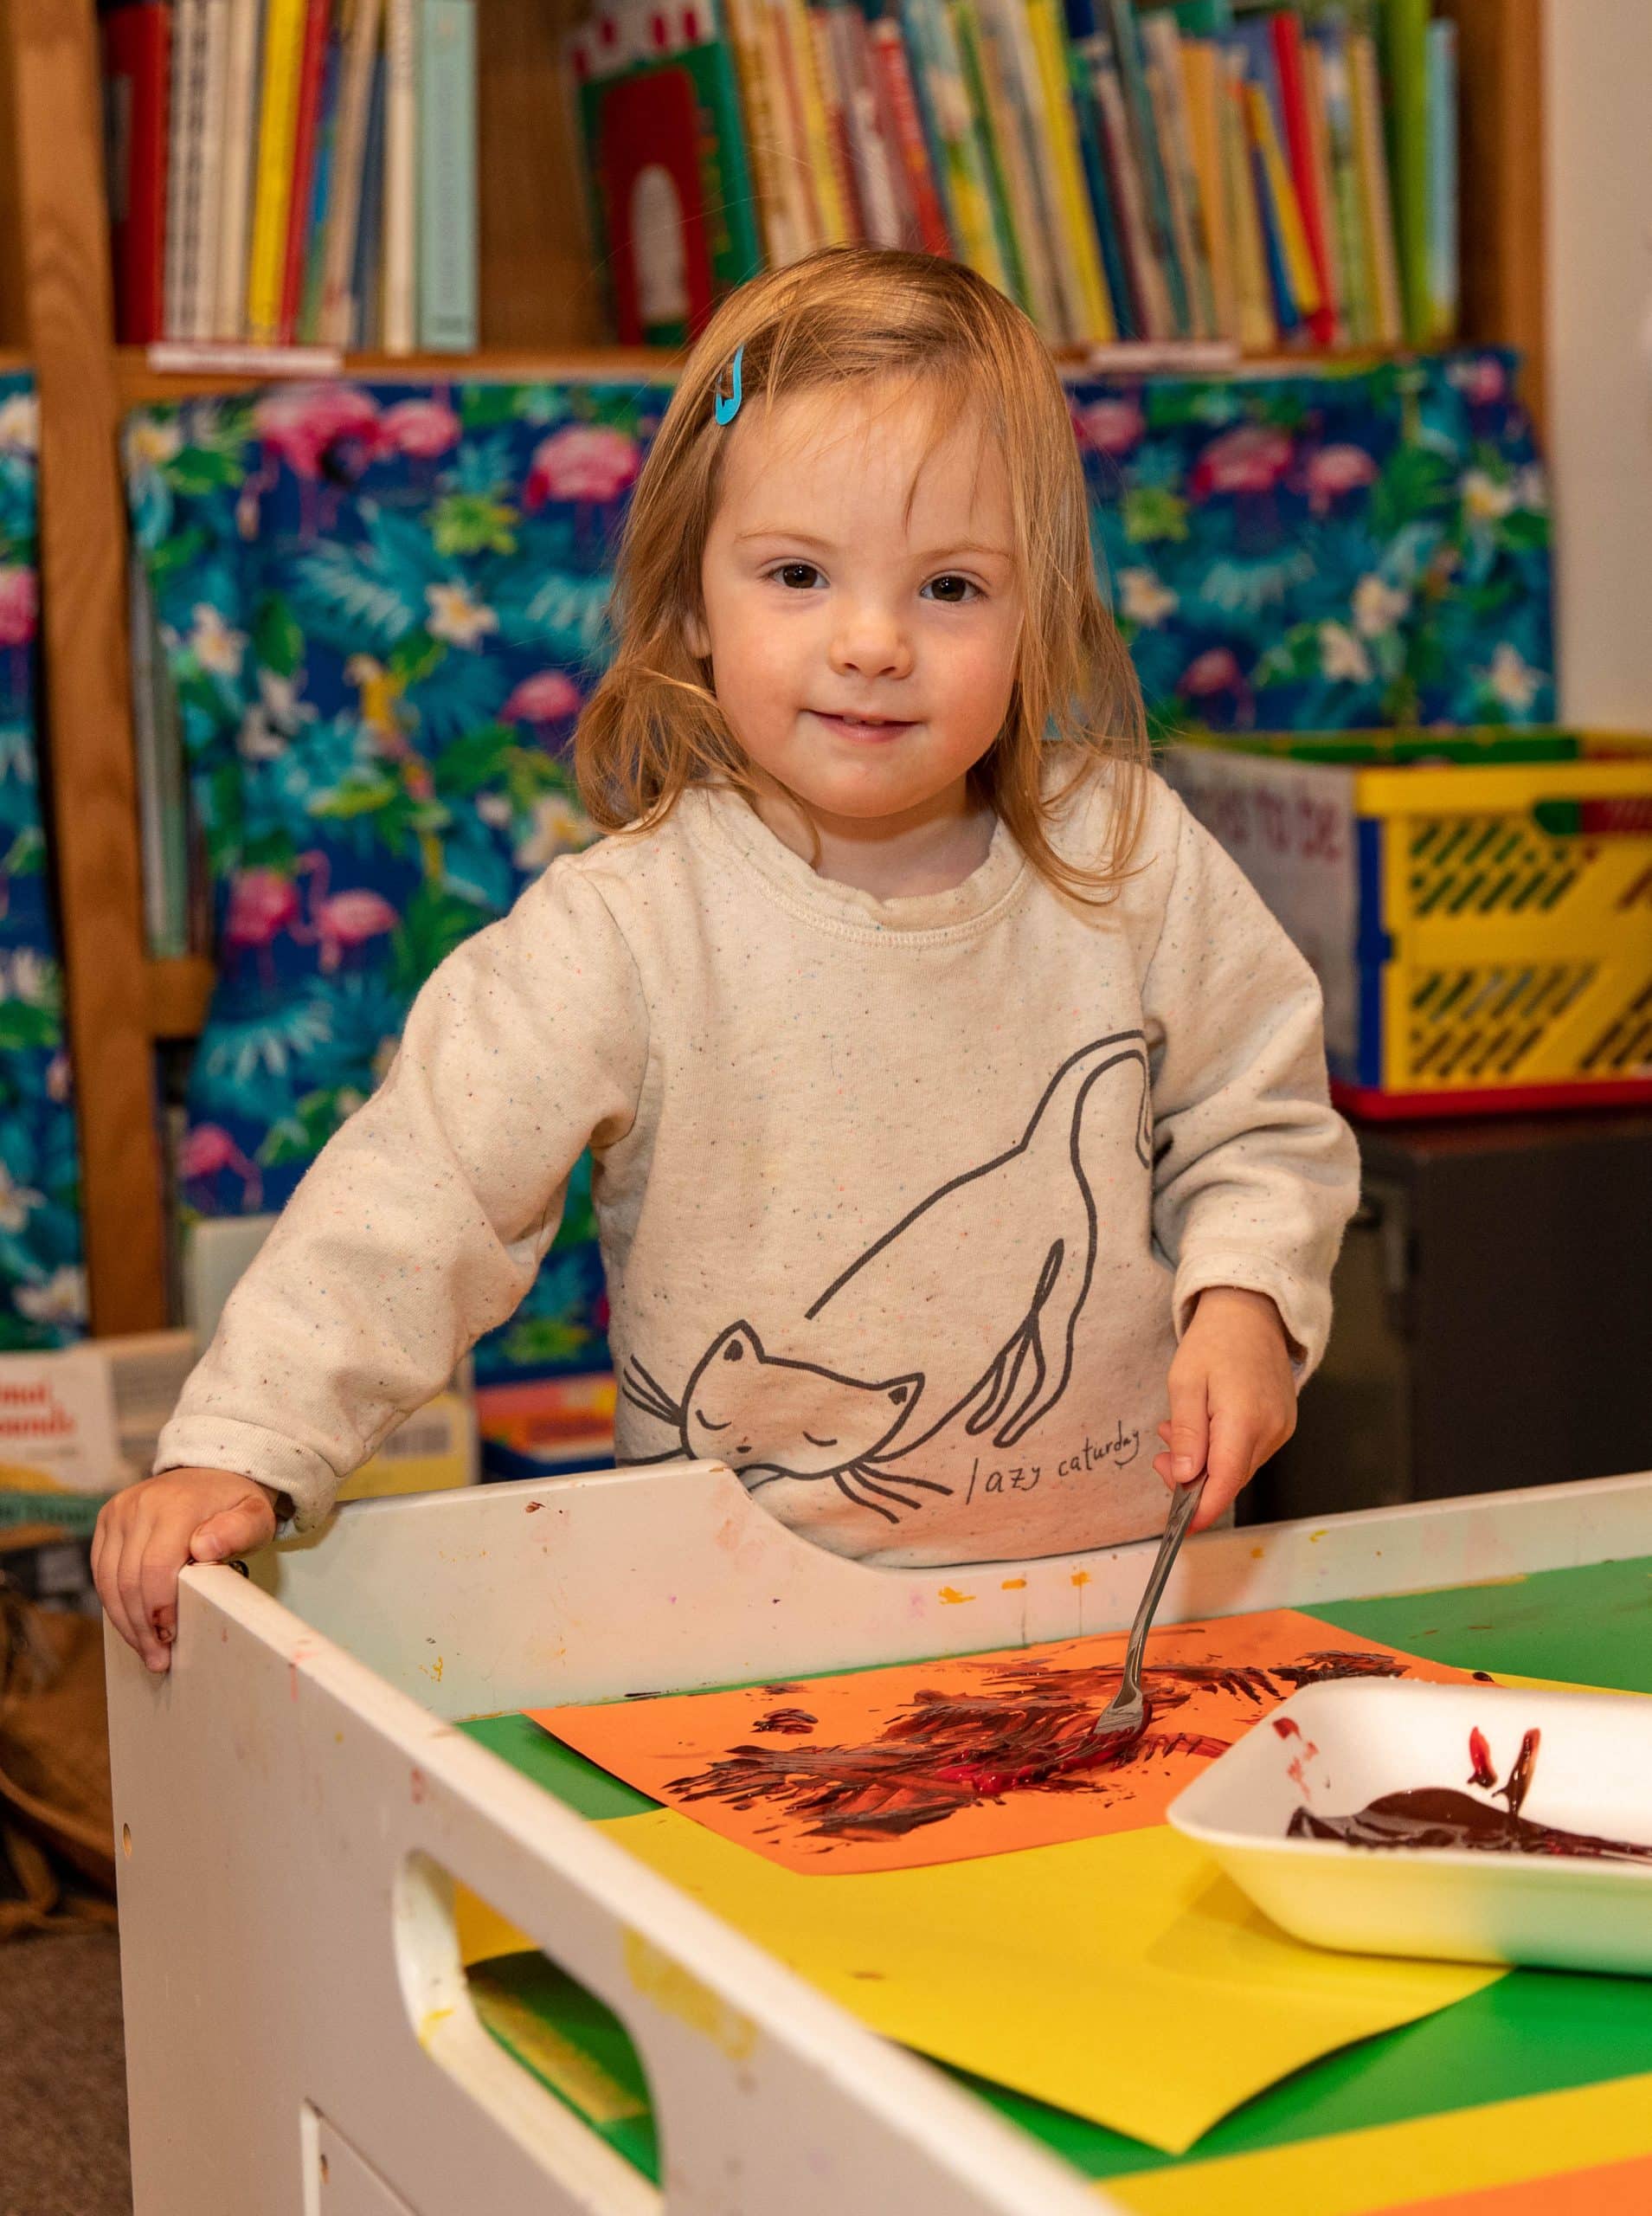 a child with long, blond hair painting with a fork onto brightly colored paper